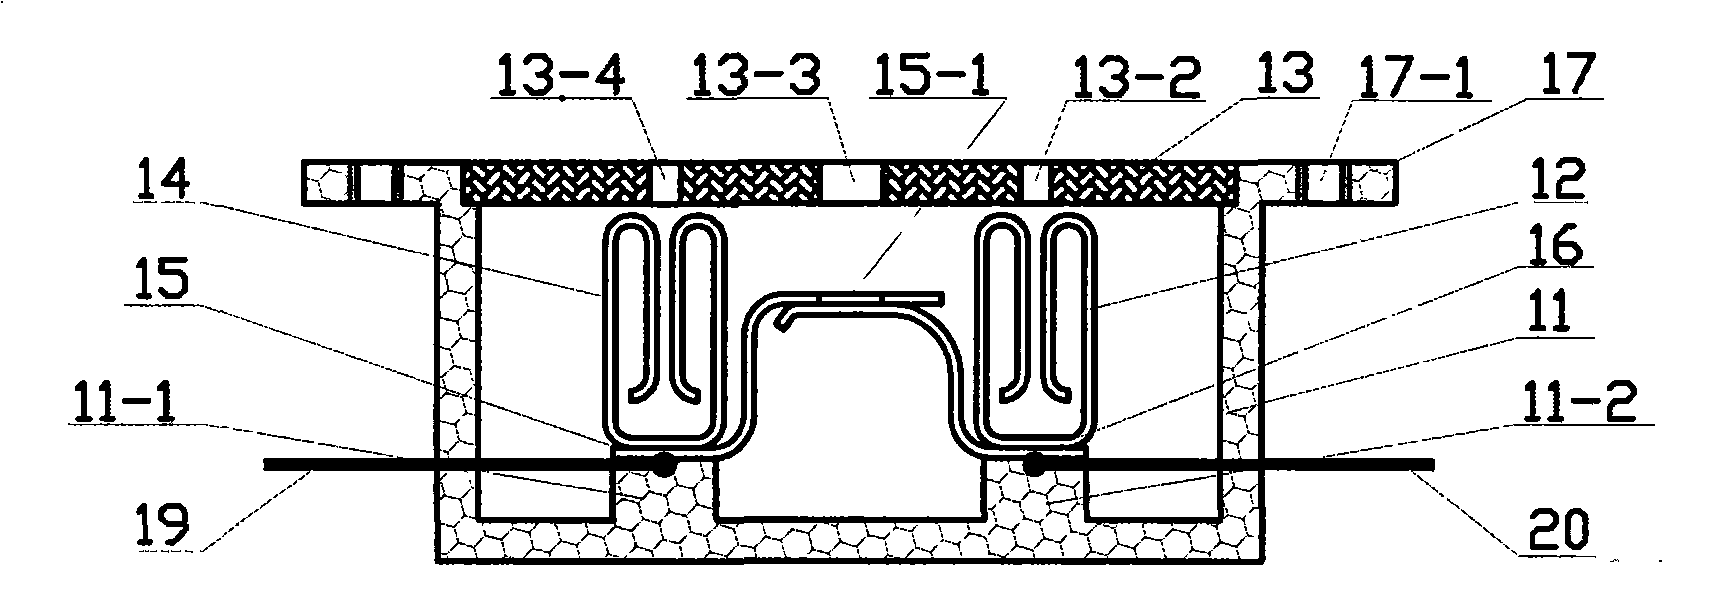 Uninterrupted meter-changing structure of inserted electric energy meter